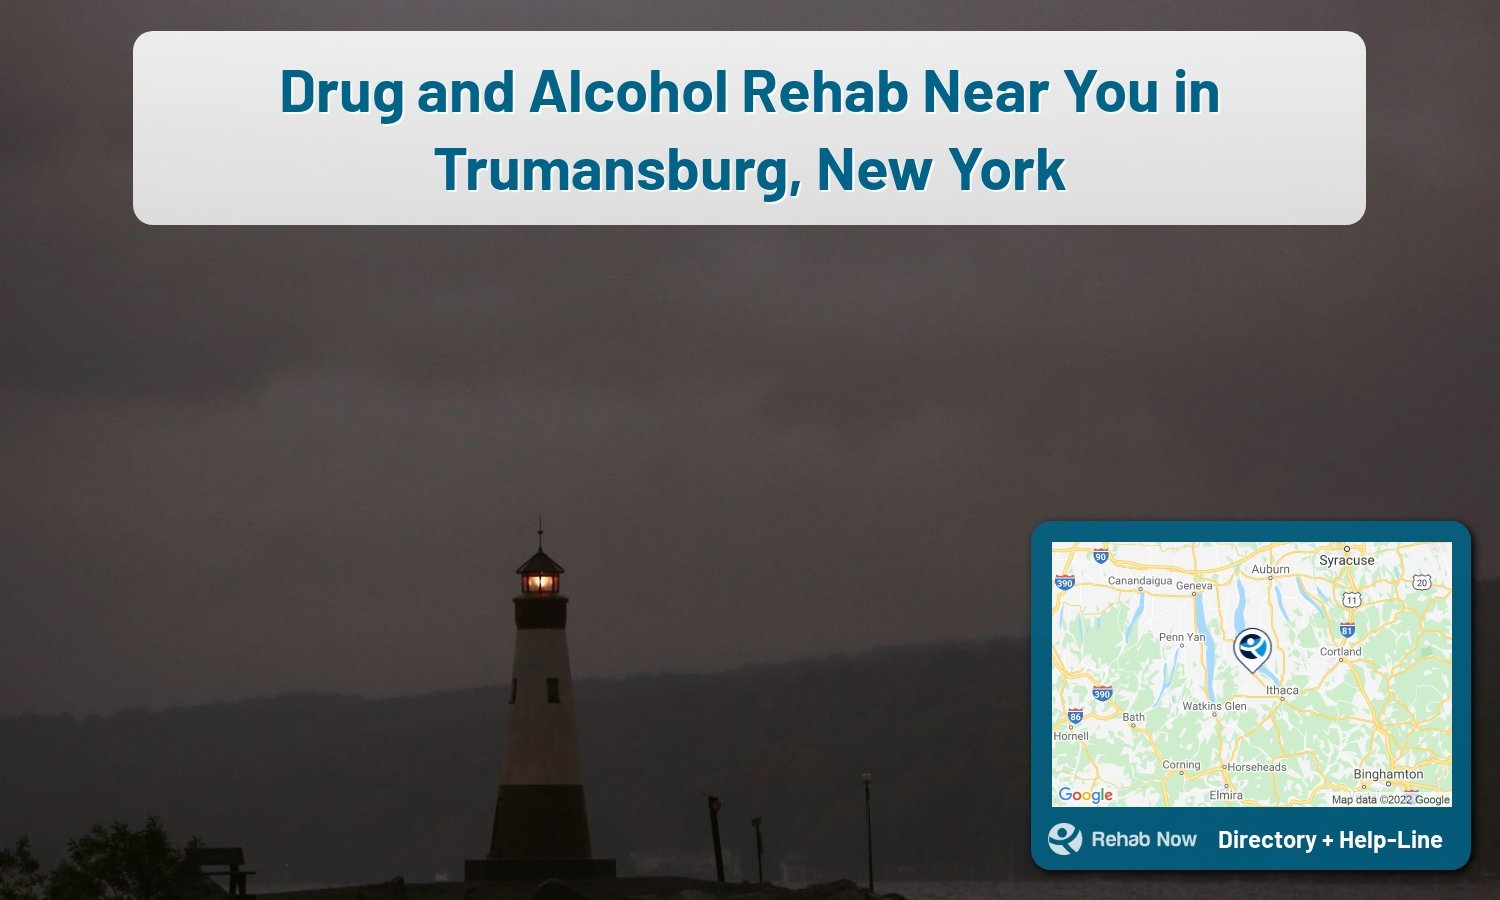 Let our expert counselors help find the best addiction treatment in Trumansburg, New York now with a free call to our hotline.